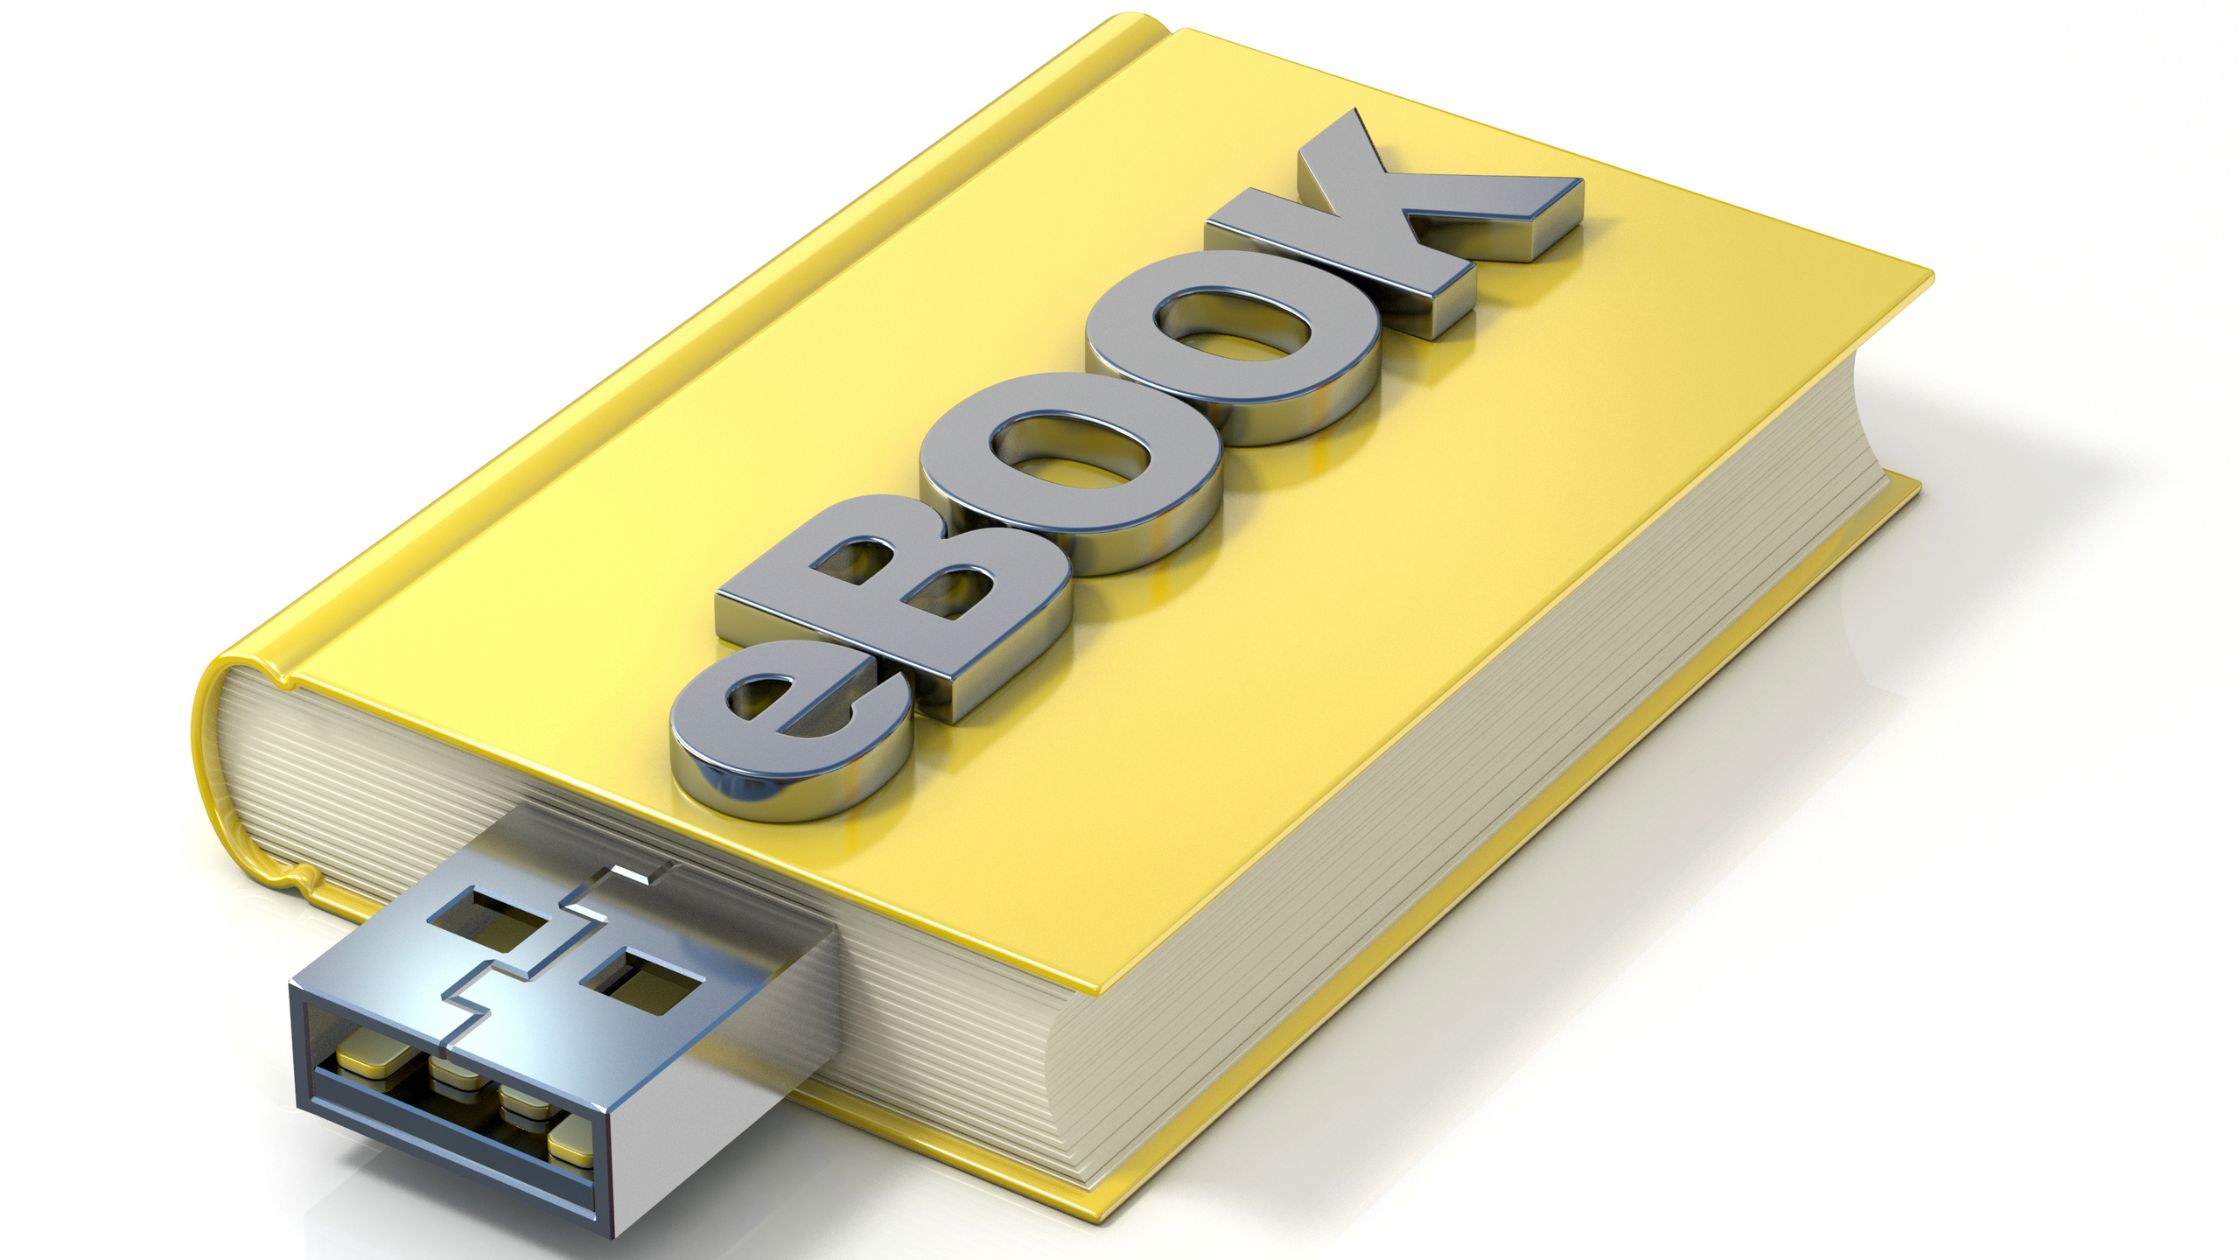 Are We Ready To EPublish in India? The epublishing trends for India